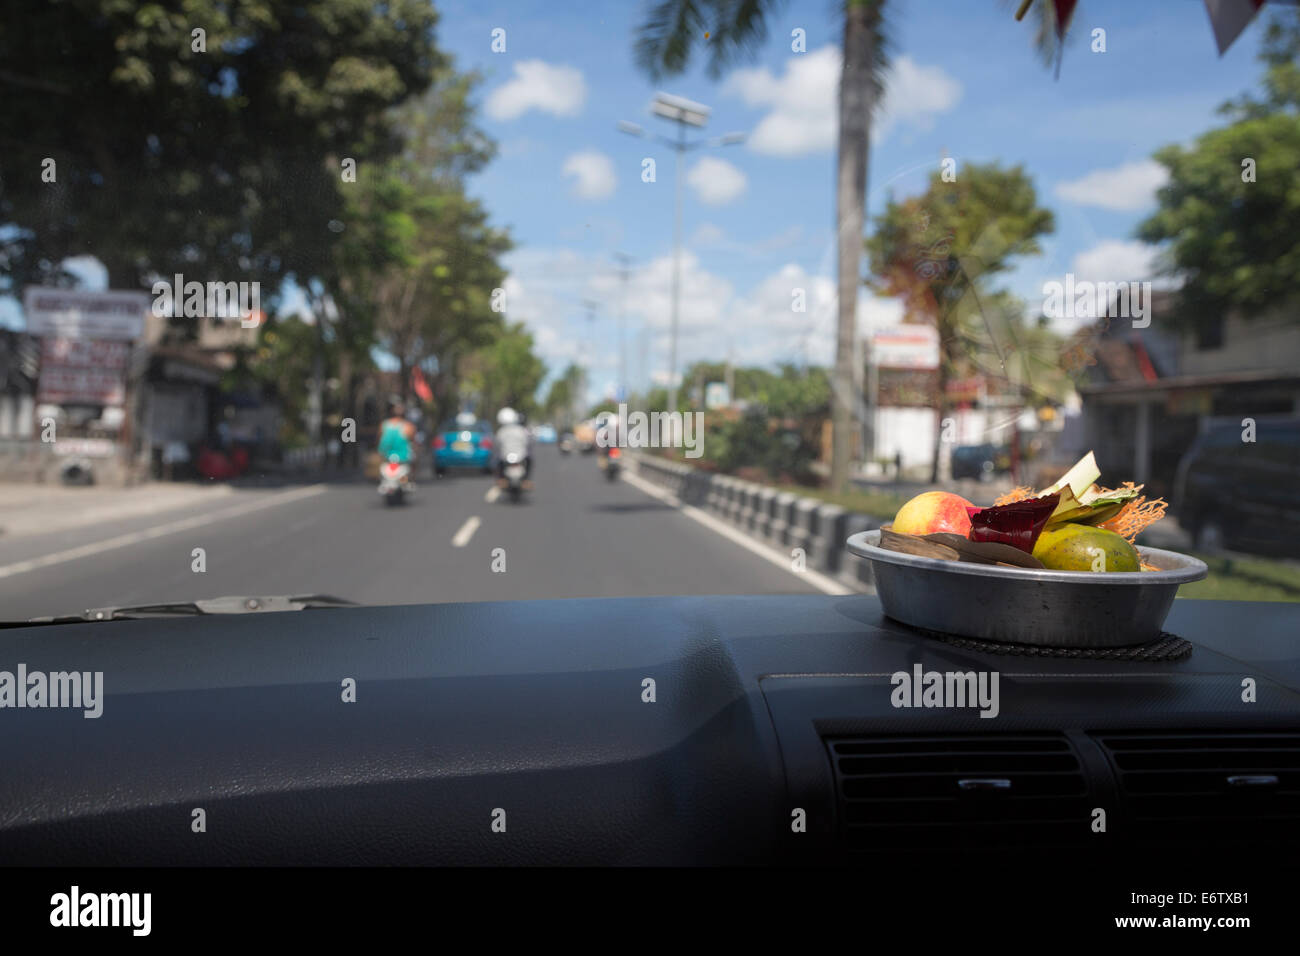 Bali, Indonesia.  A Canang, a Balinese Offering to the Gods, on the Dashboard of a Private Car. Stock Photo